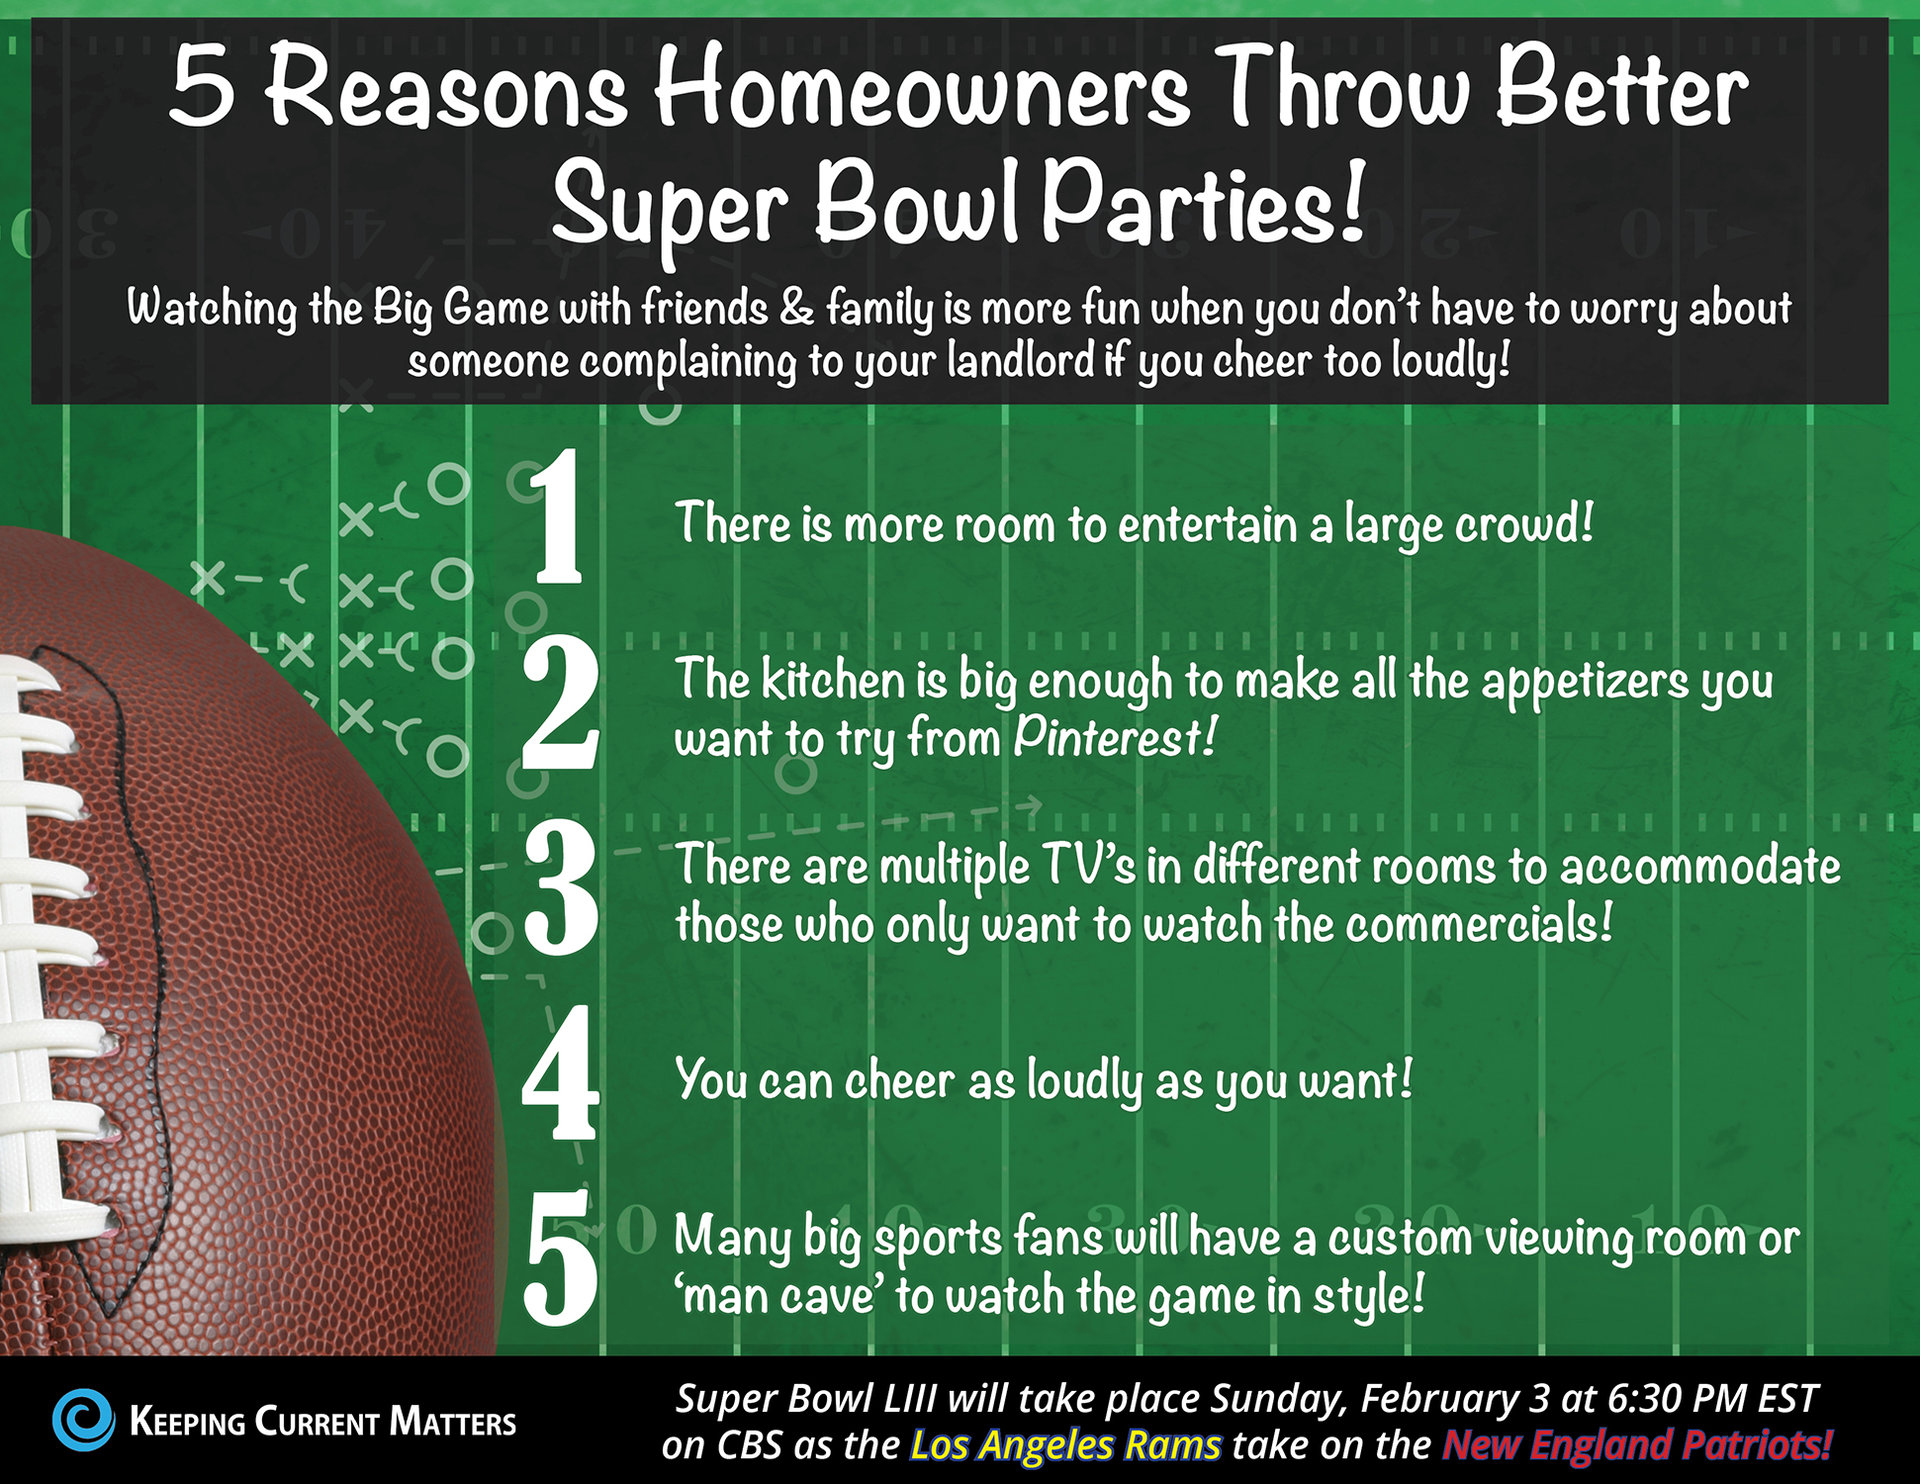 5 Reasons Homeowners Throw the Best Super Bowl Parties! [INFOGRAPHIC] | Keeping Current Matters